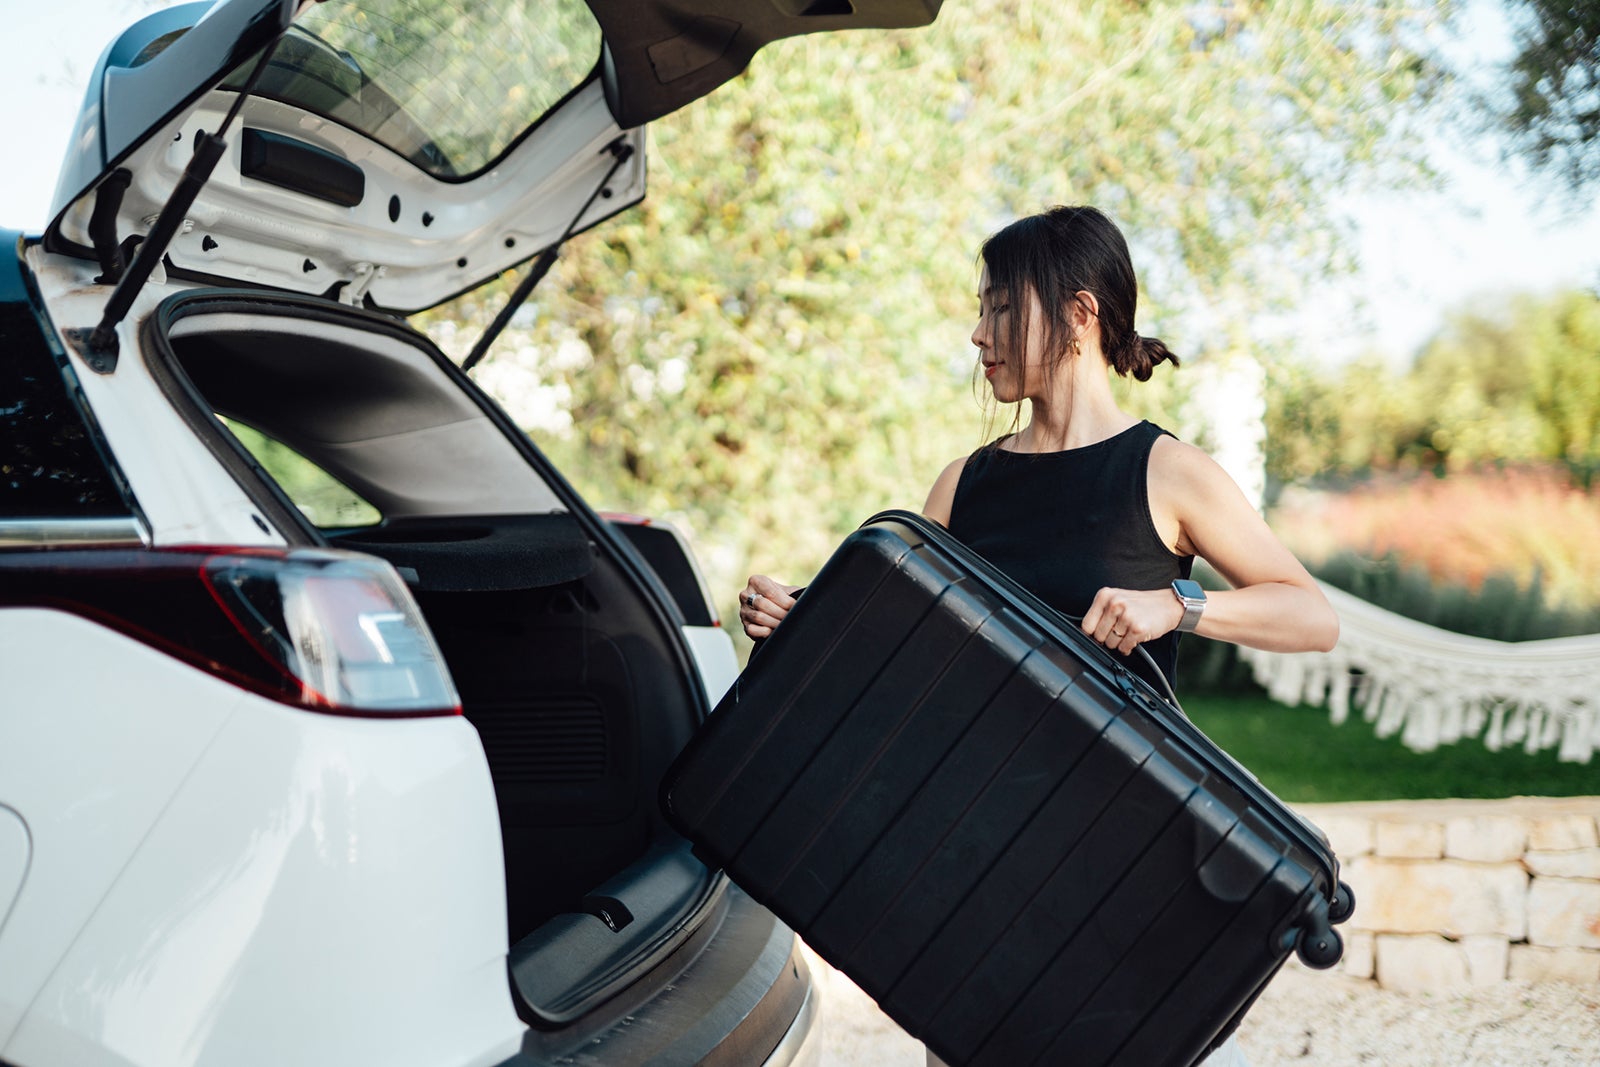 woman loading luggage into car, getting ready for a road trip